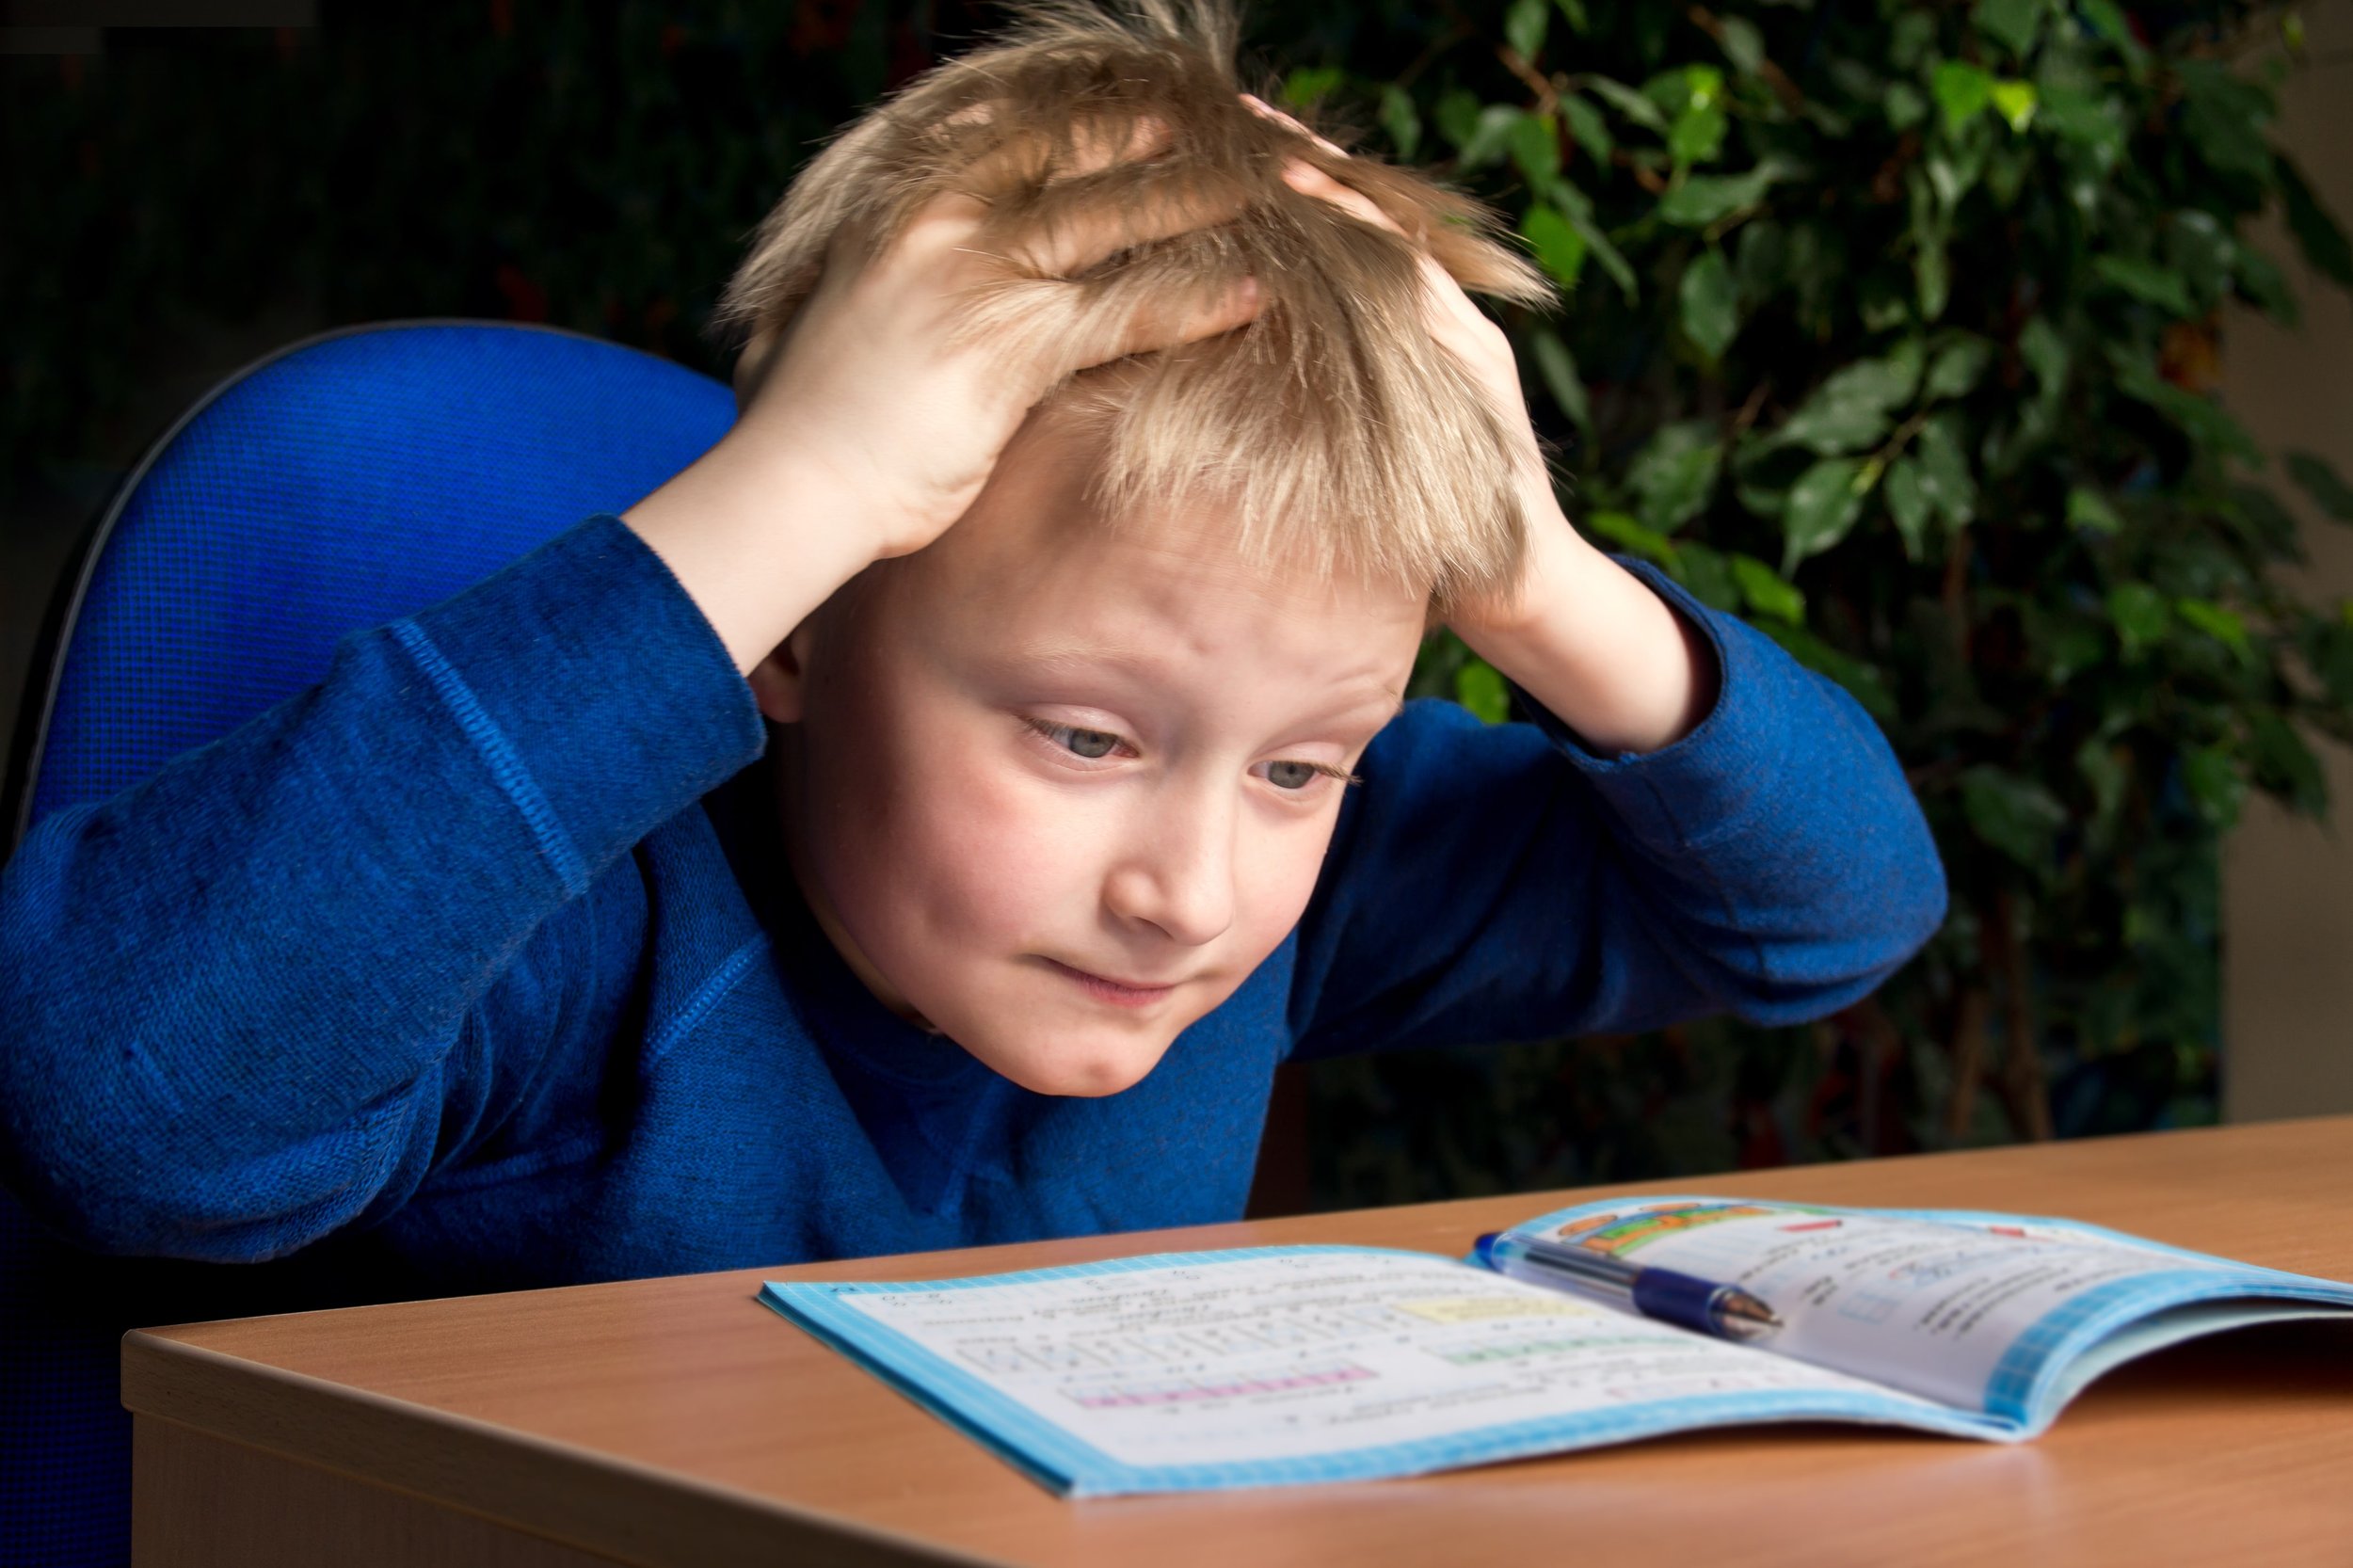 Children with an anxiety disorder do poorly academically due to language and memory deficits